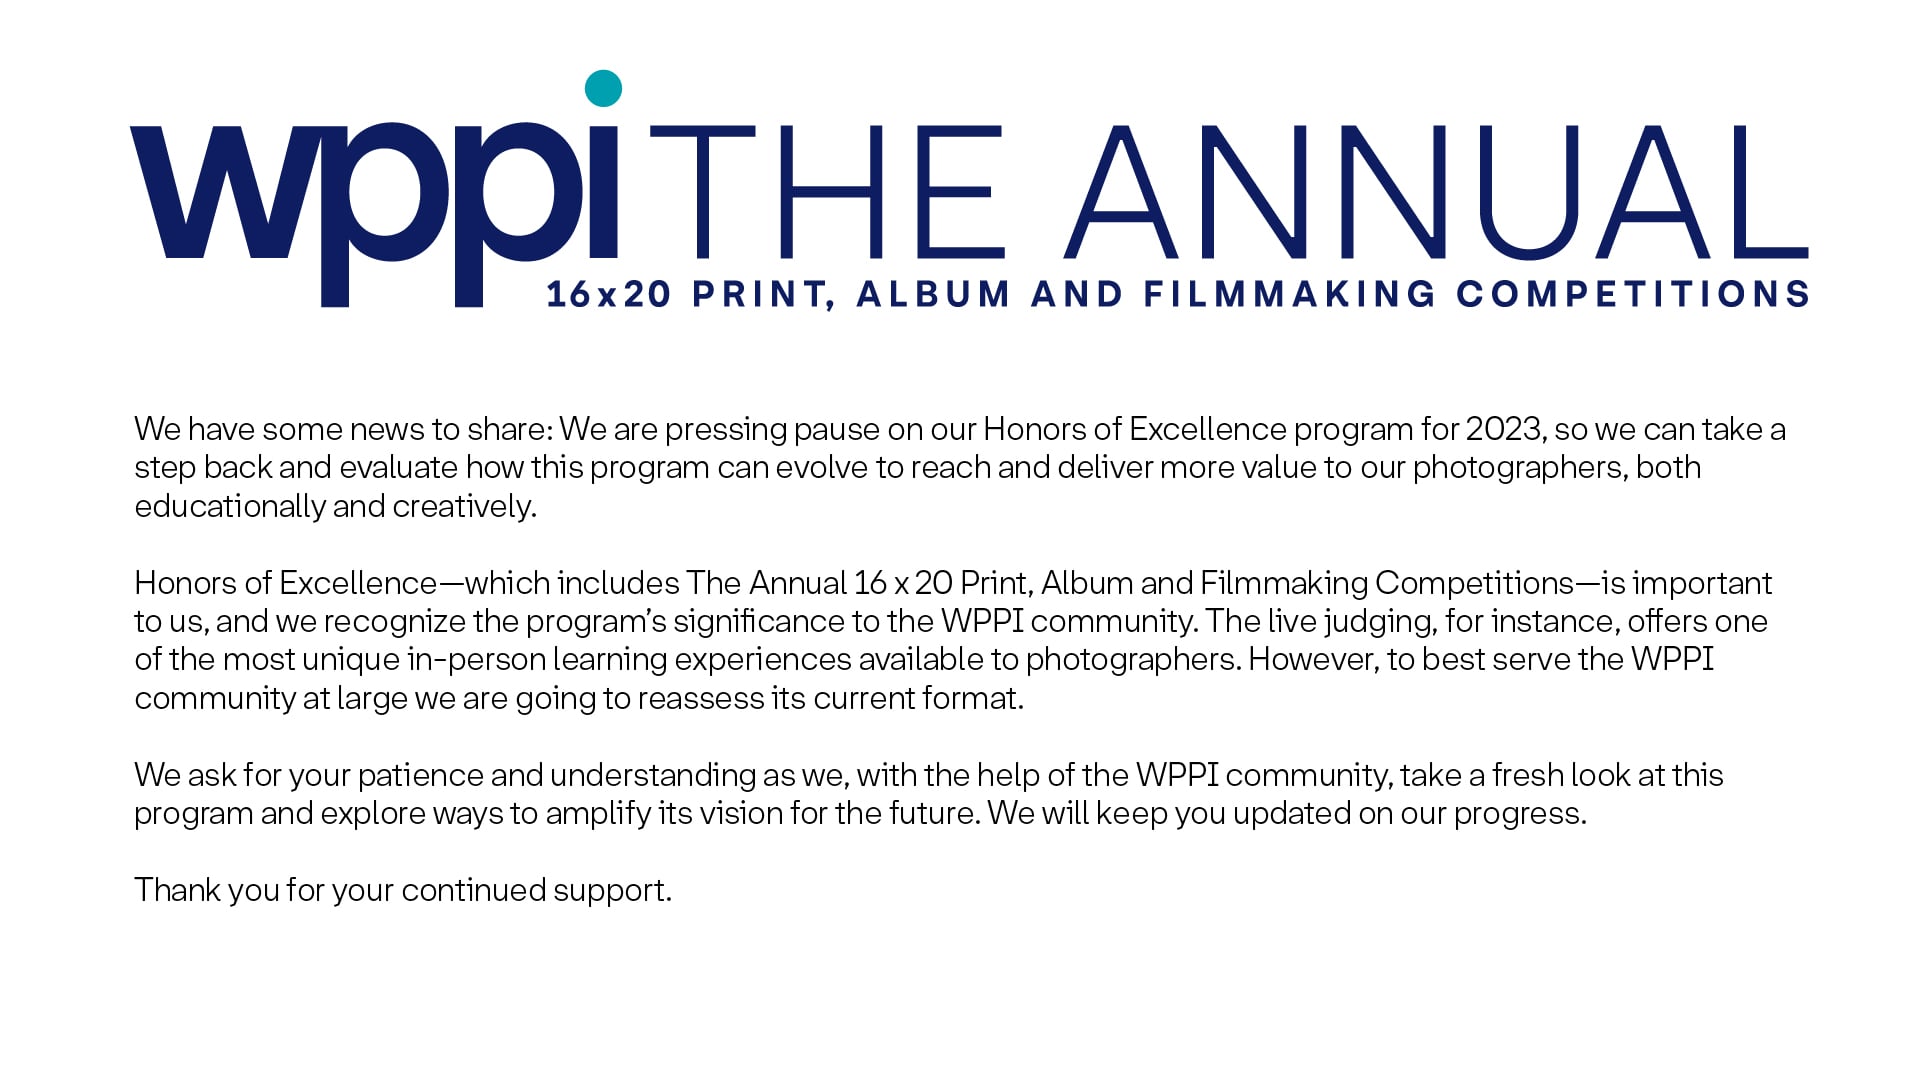 WPPI The Annual 2022 picture